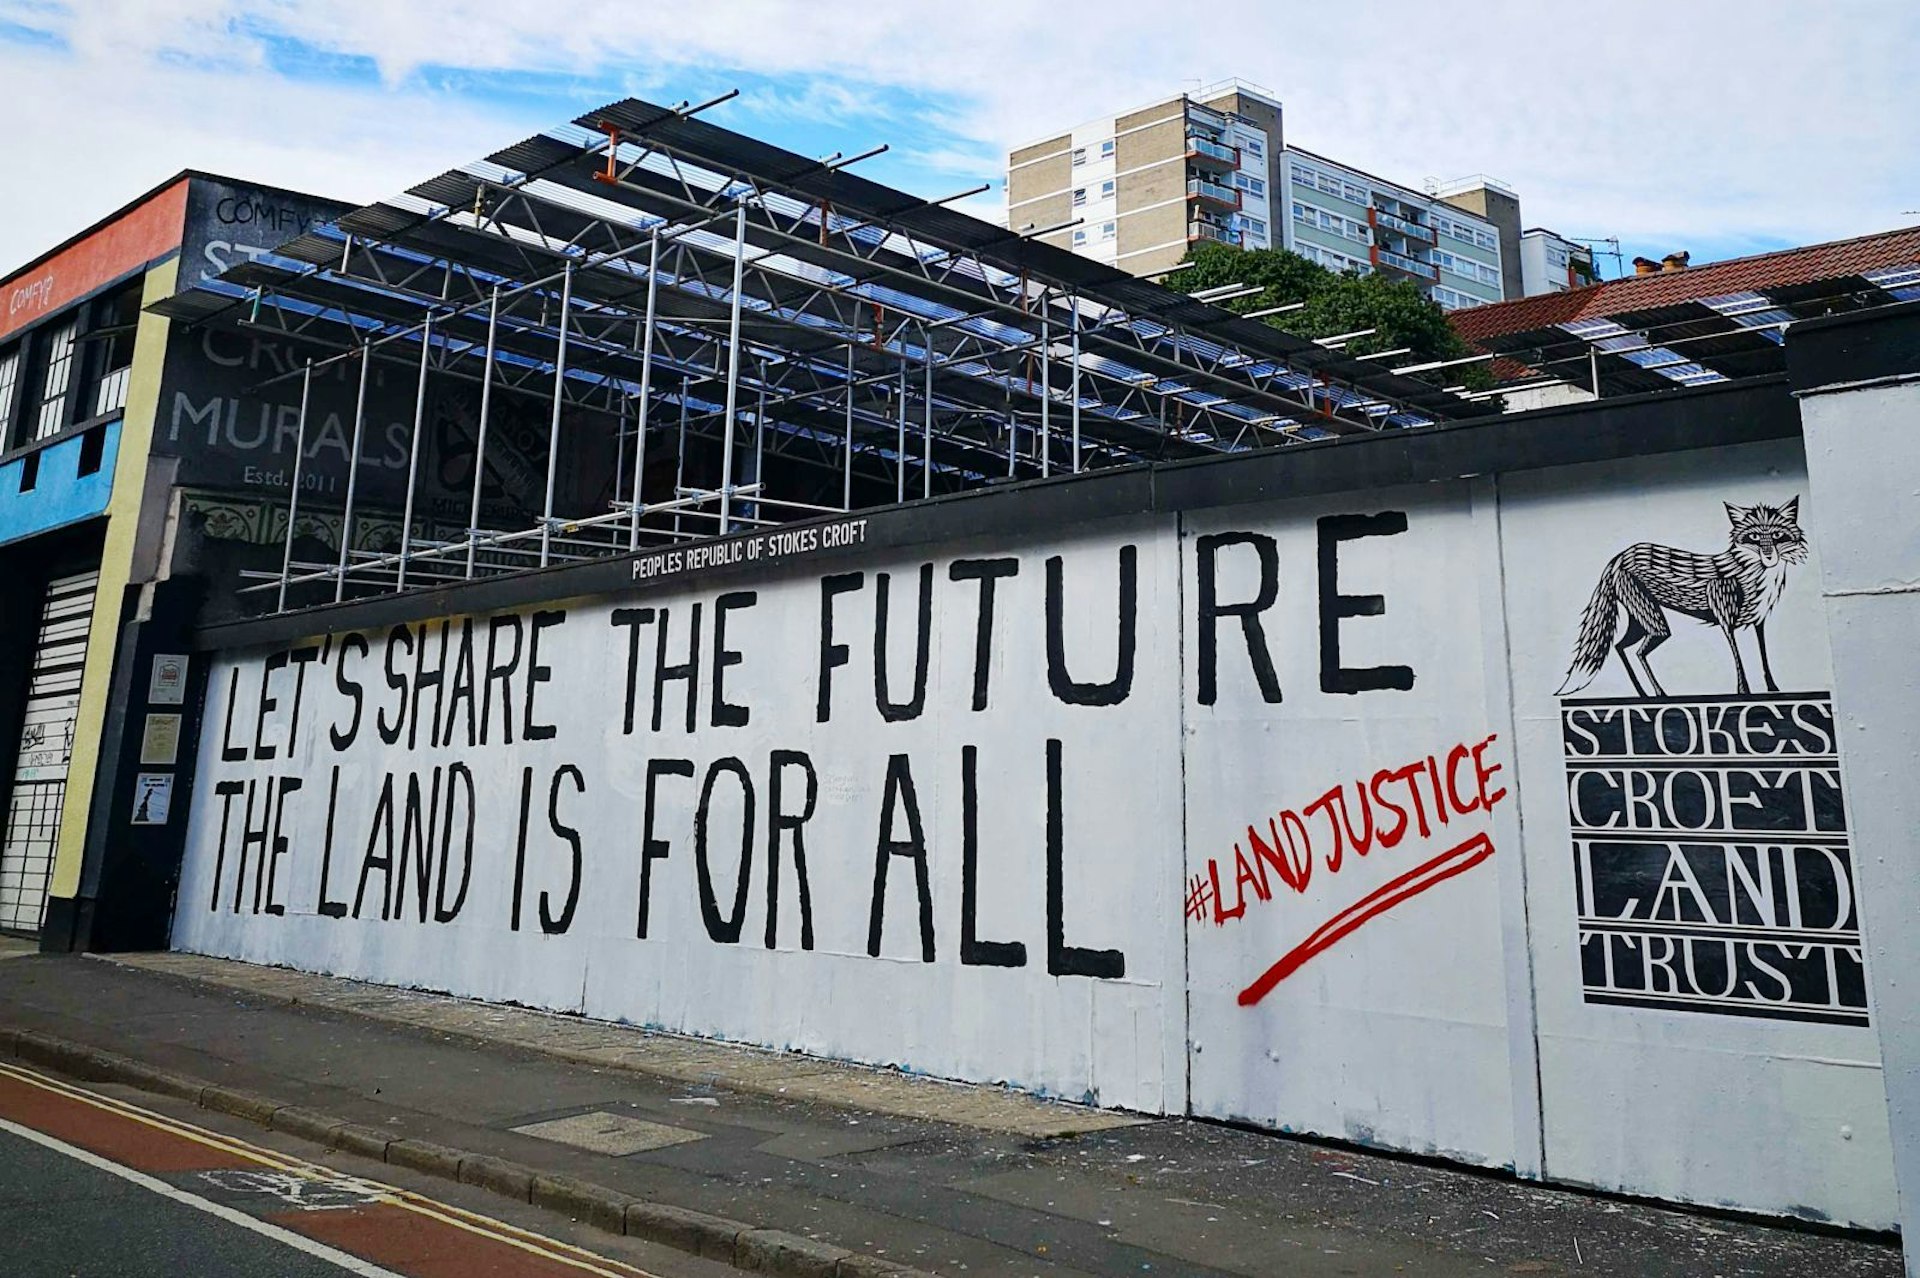 In the face of gentrification, Bristol residents are resisting